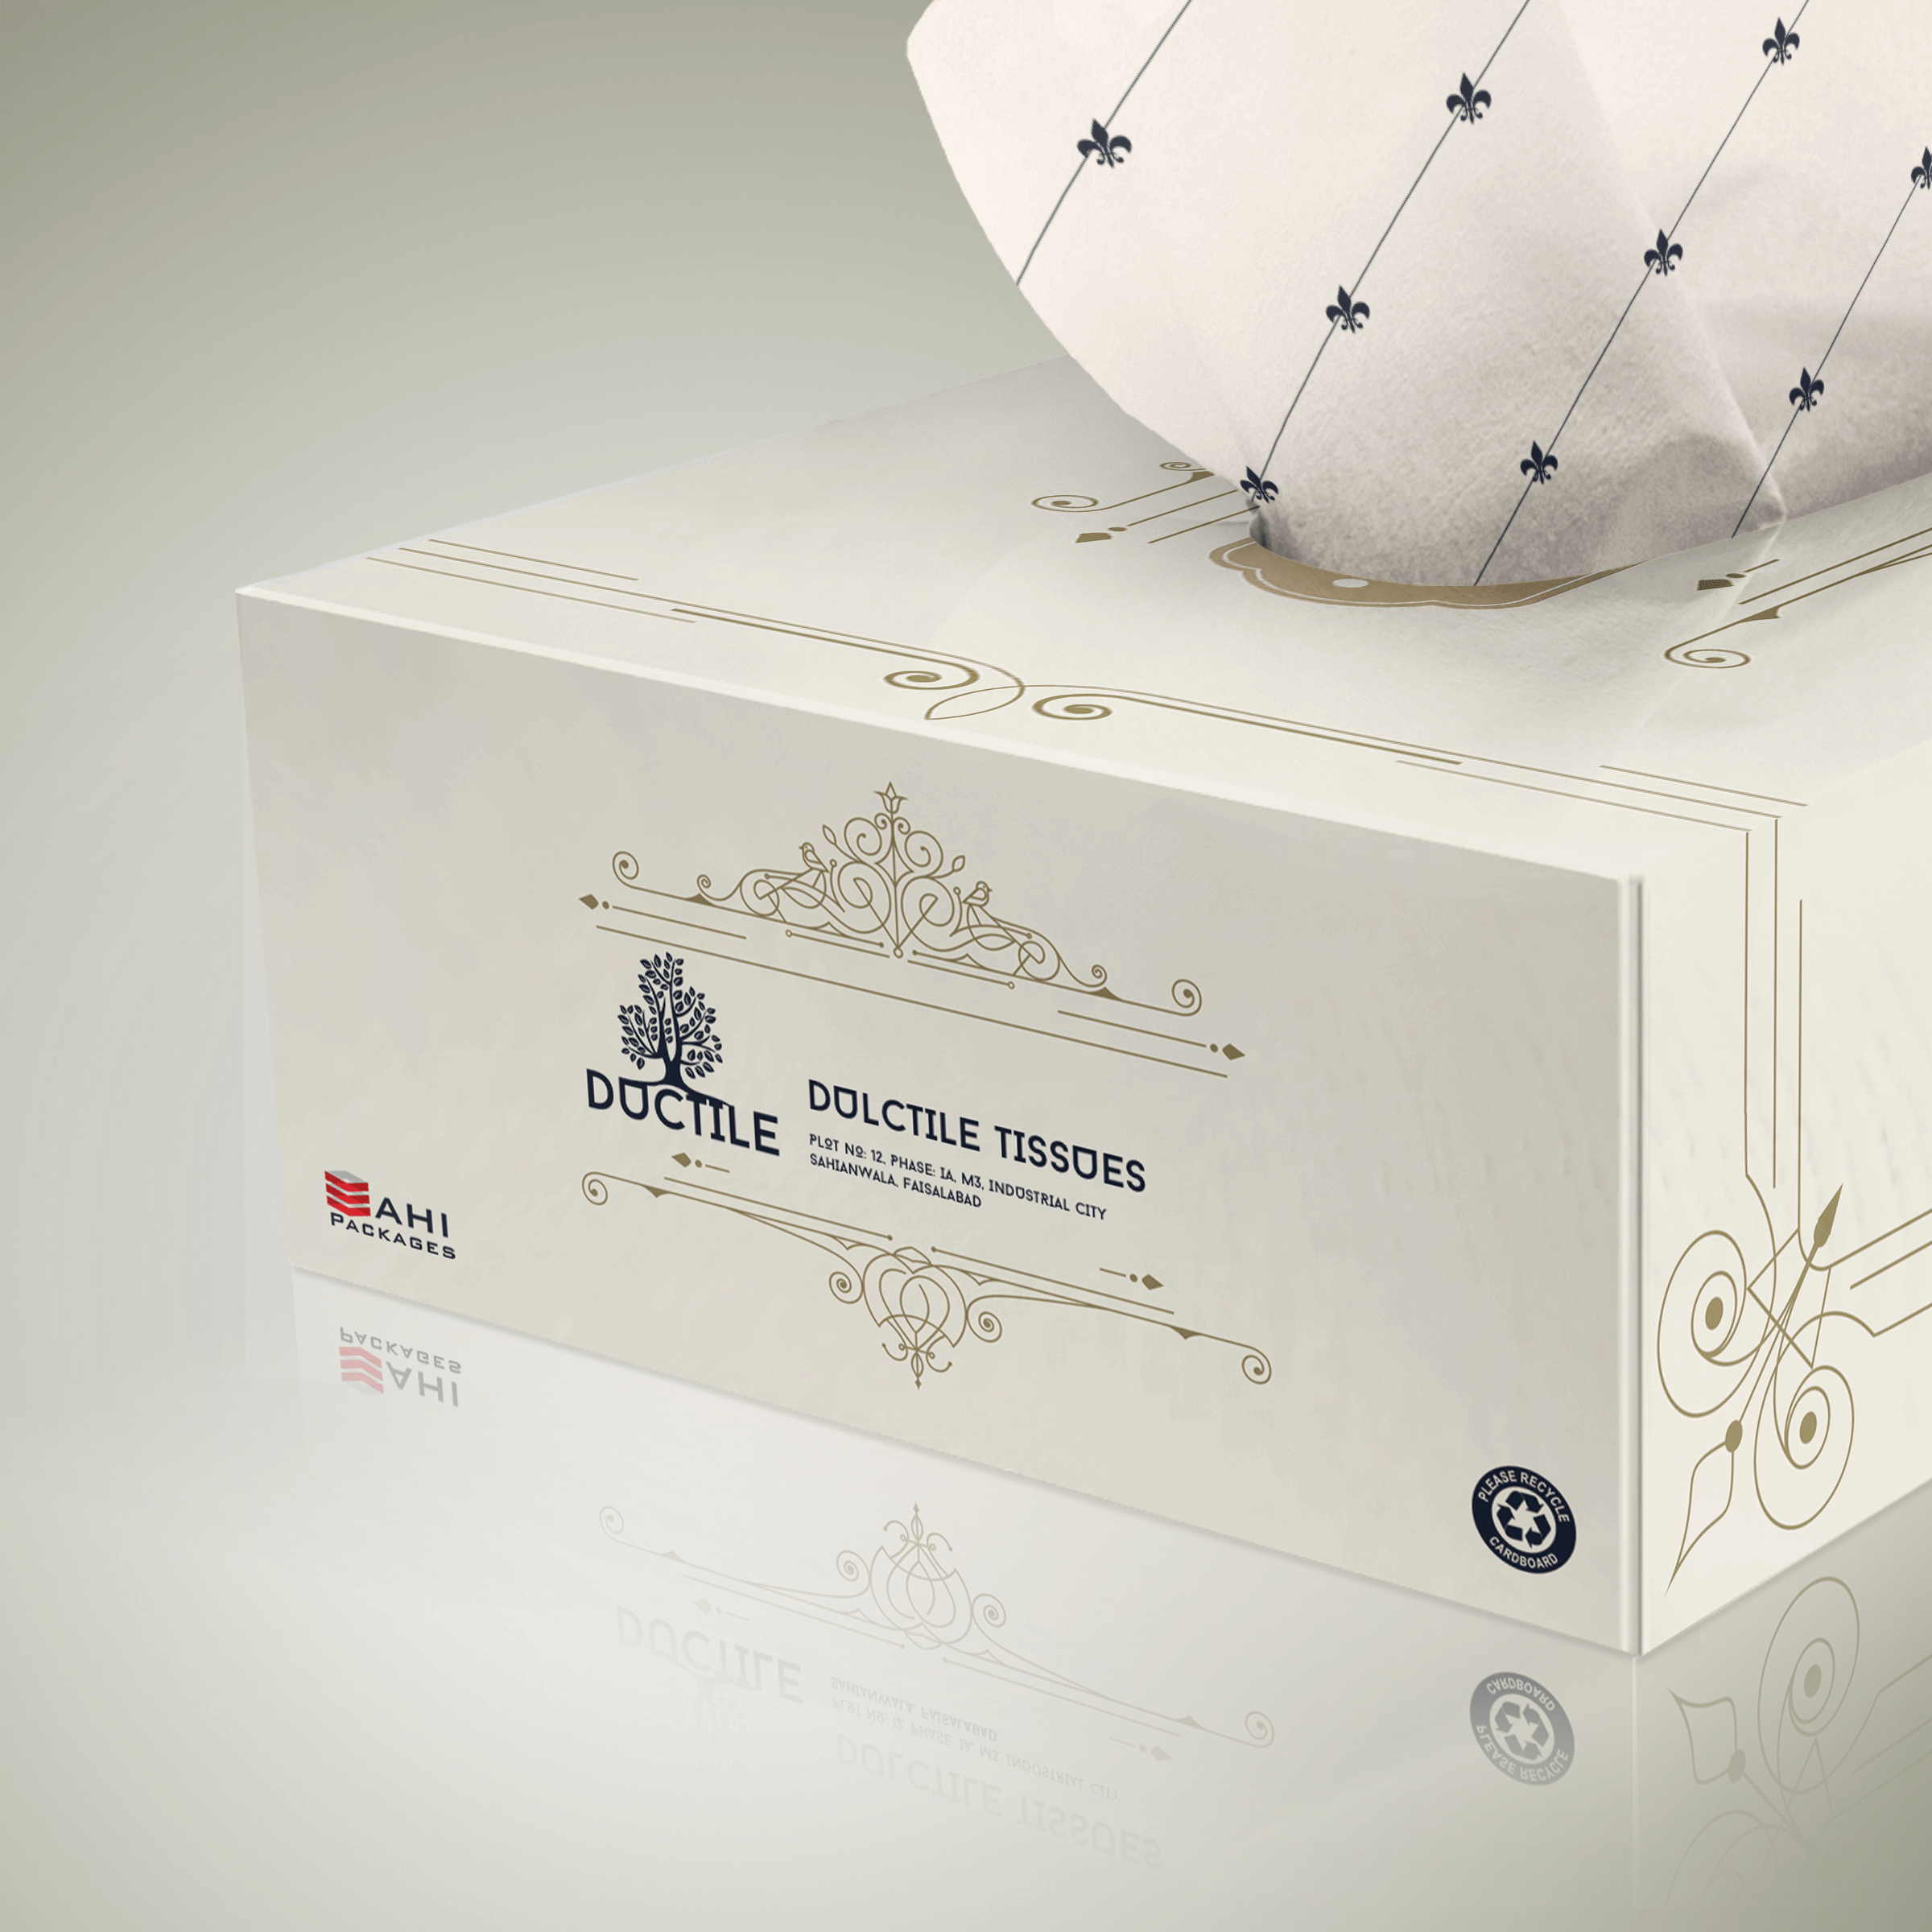 Tissues Box Packaging Design Concept